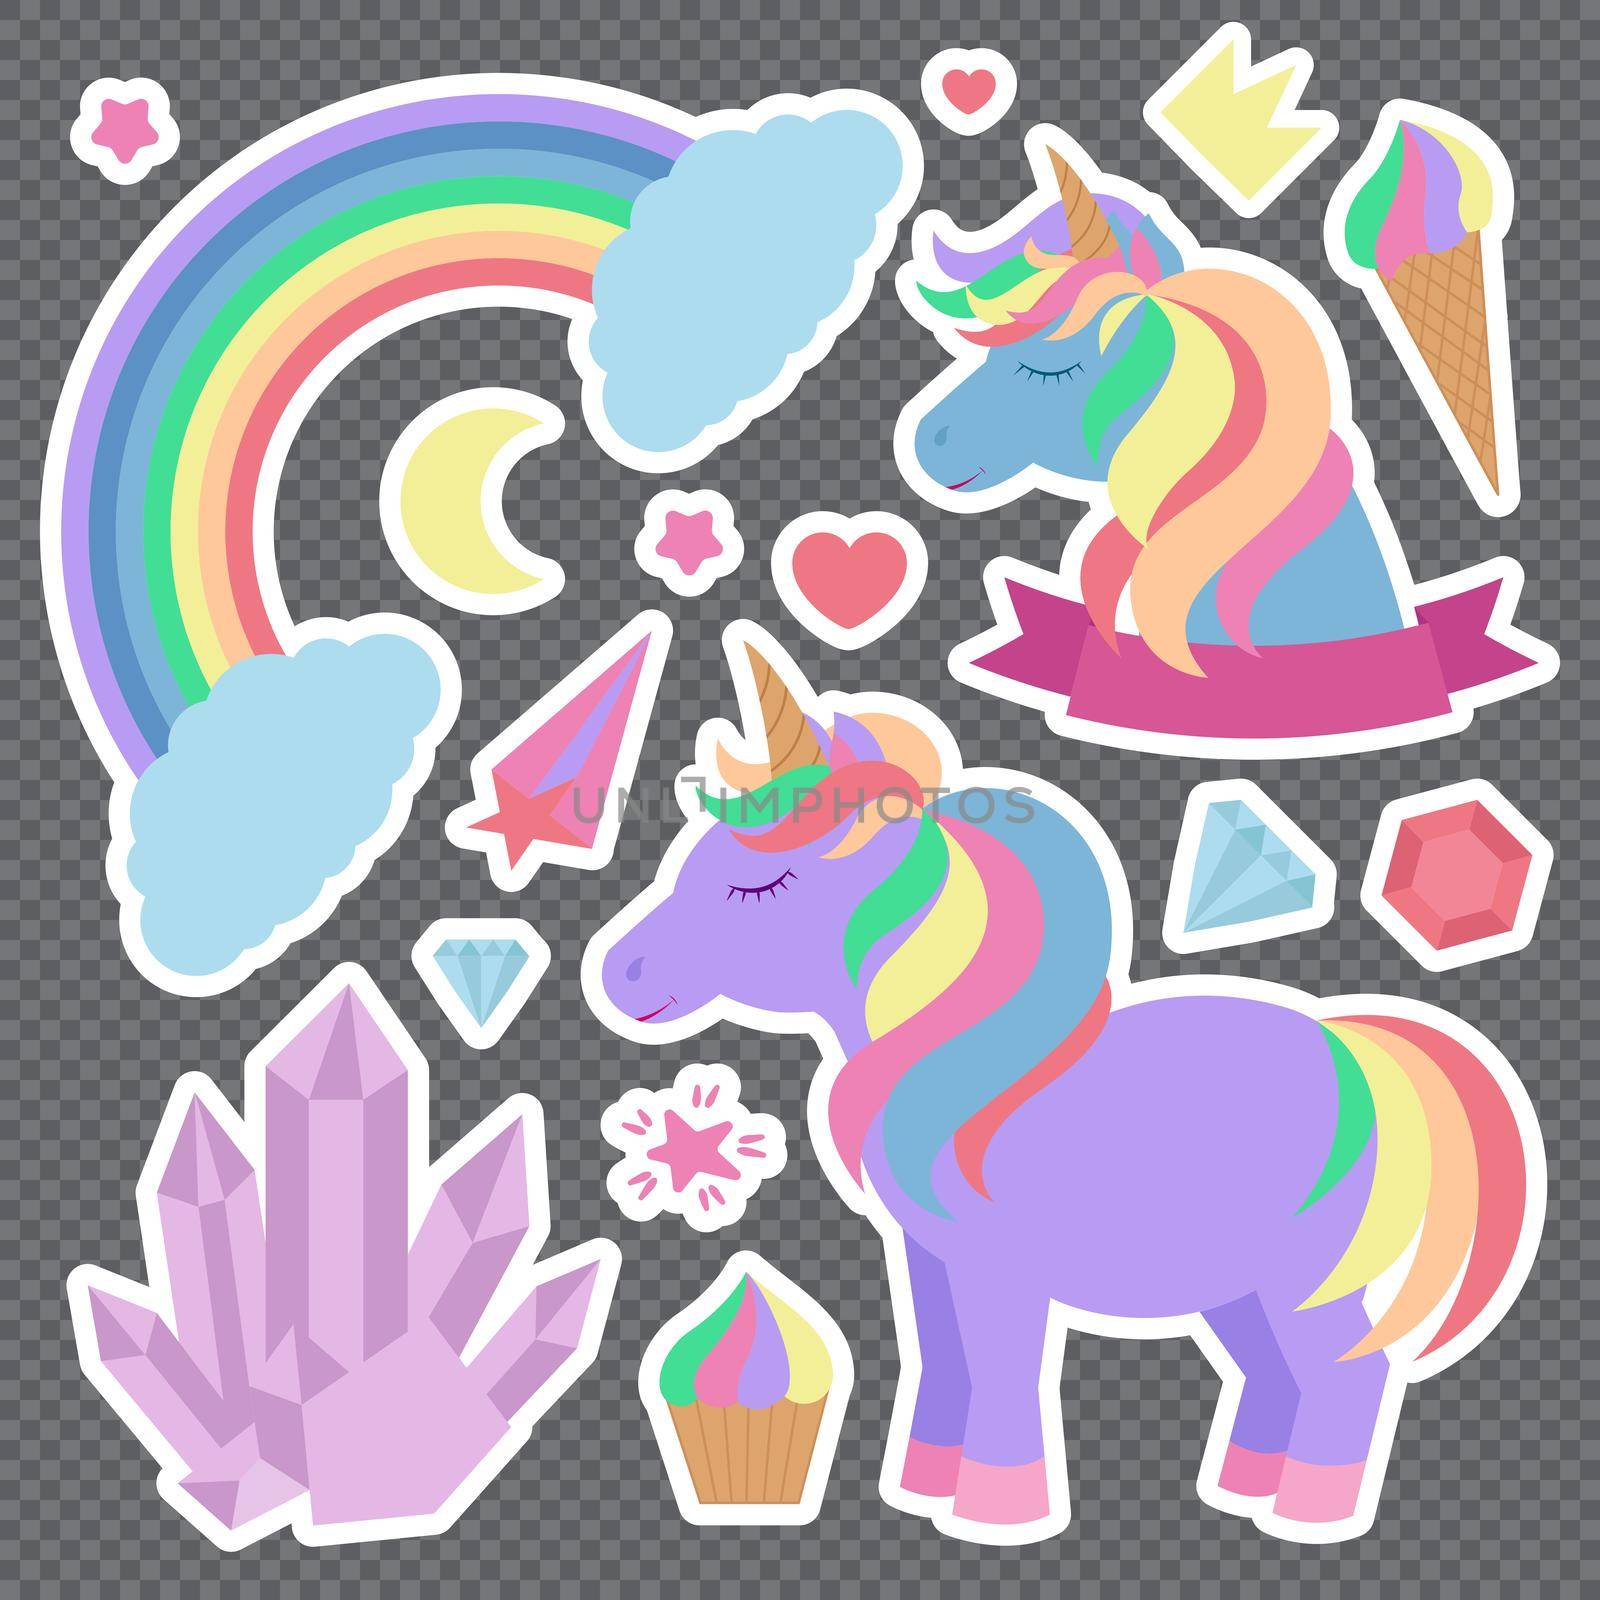 Cute unicorns and other elements. Set of stickers on background.